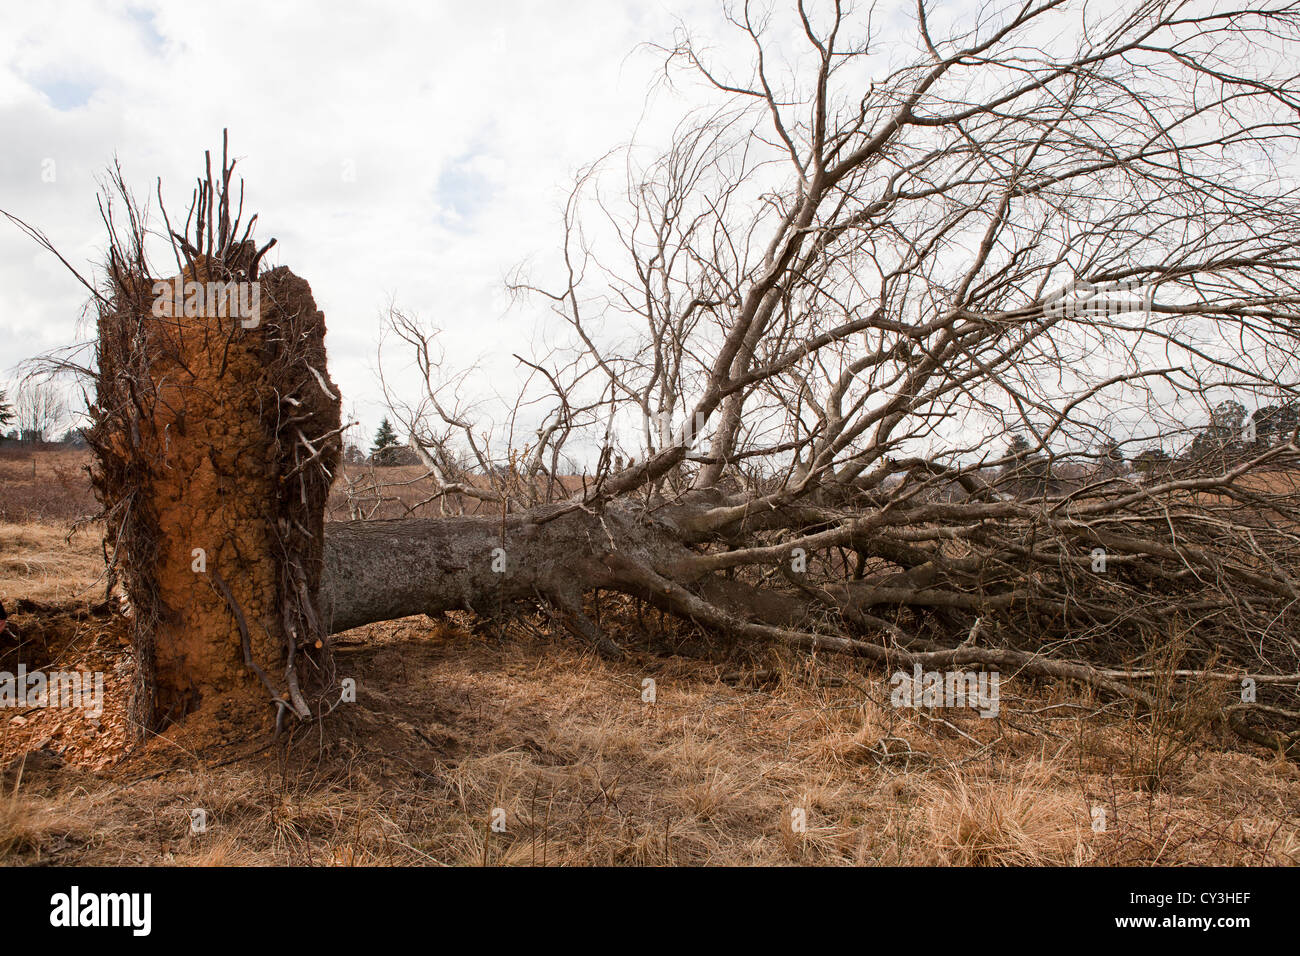 Uprooted dead big tree lying in a field with roots visibly compacted with hard soil. Stock Photo